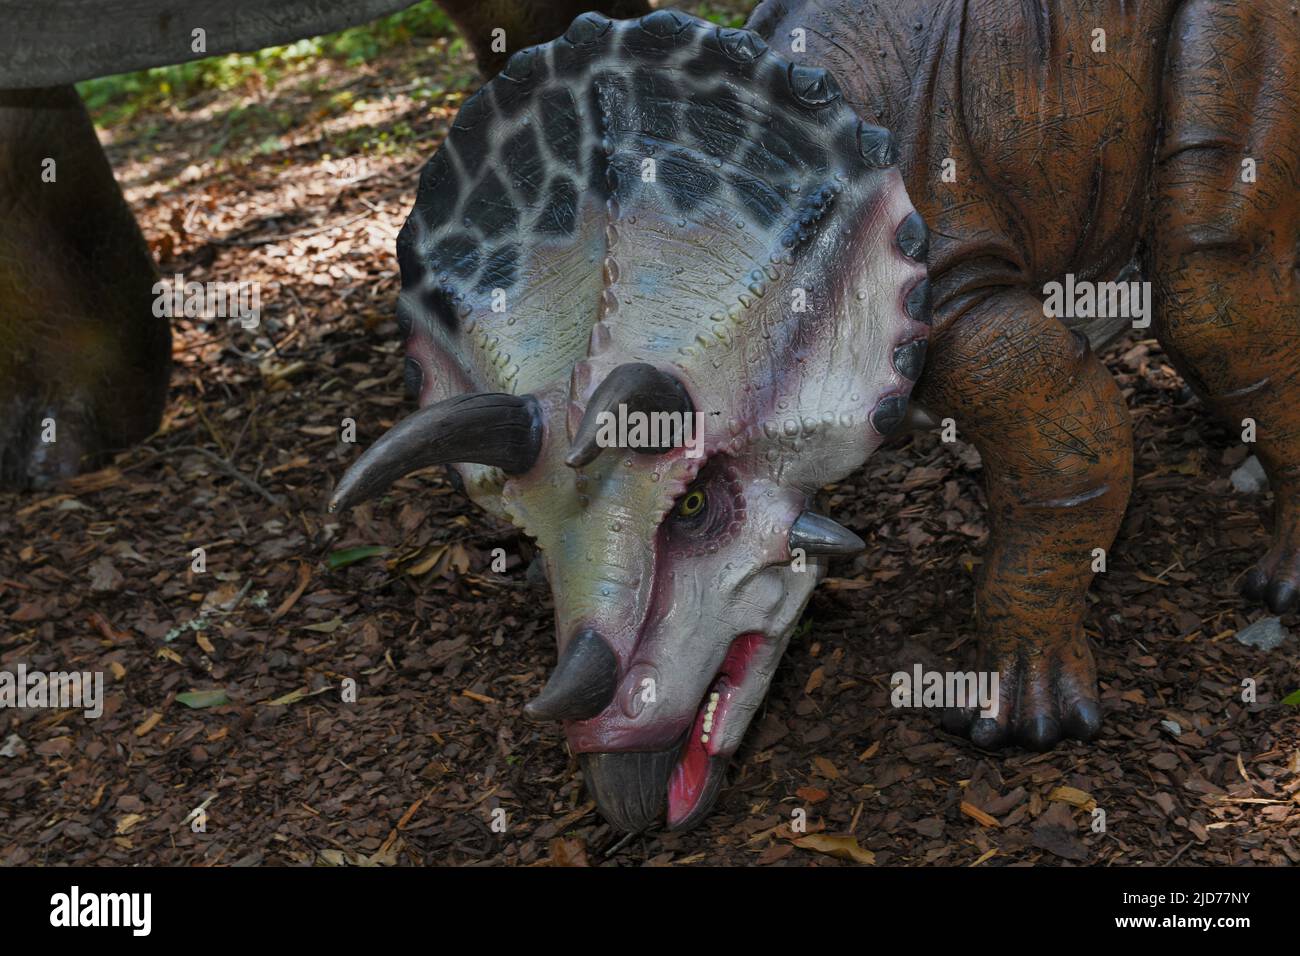 A baby triceratops. Stock Photo